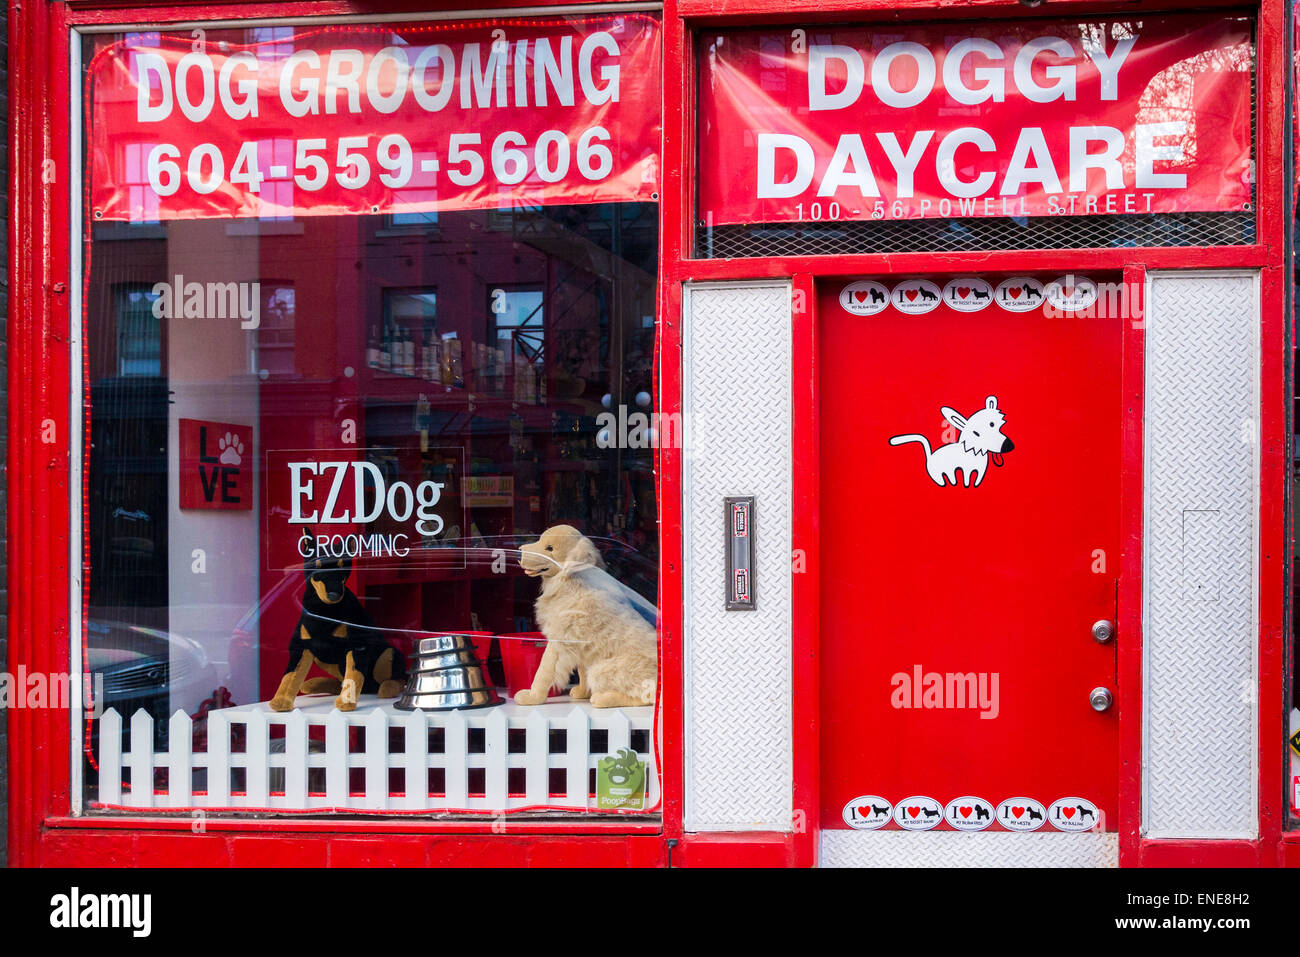 Doggy Daycare storefront, Vancouver, British Columbia, Canada Banque D'Images